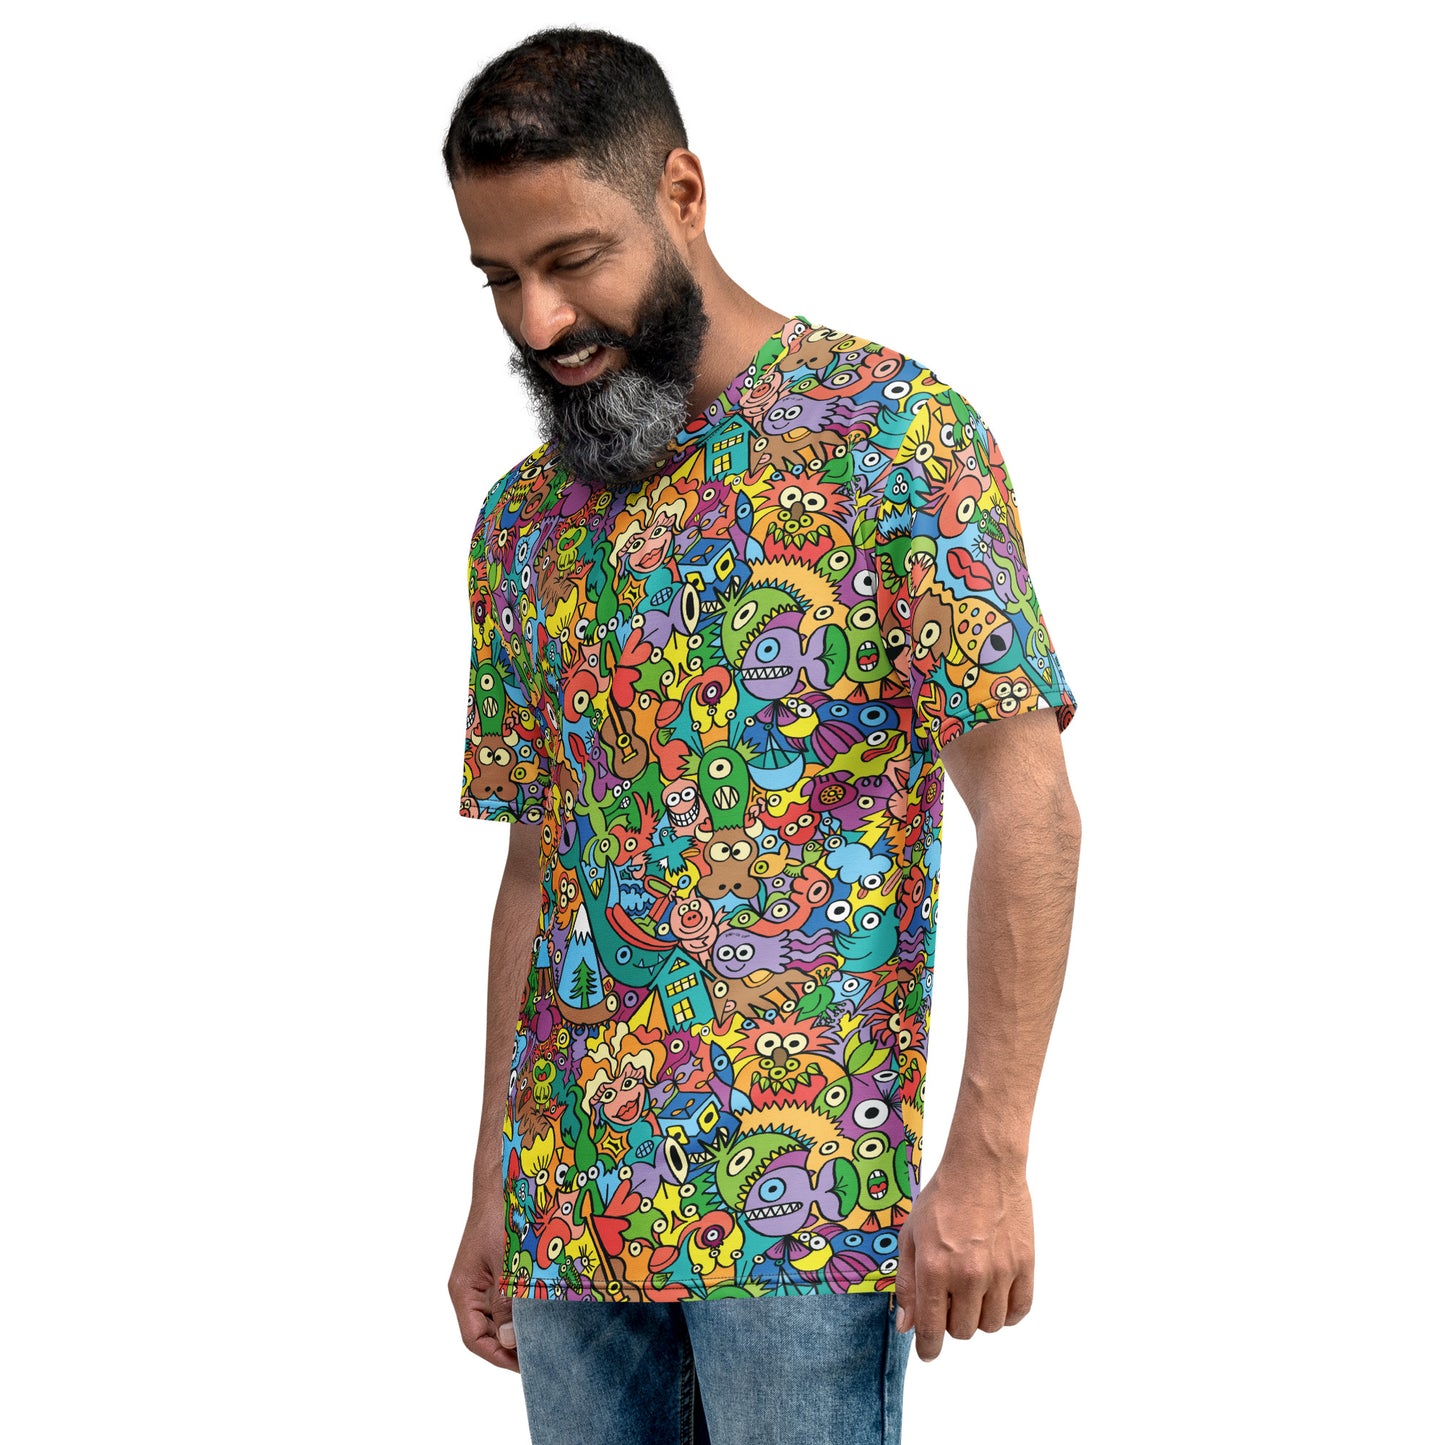 Cheerful crowd enjoying a lively carnival Men's T-shirt. Side view